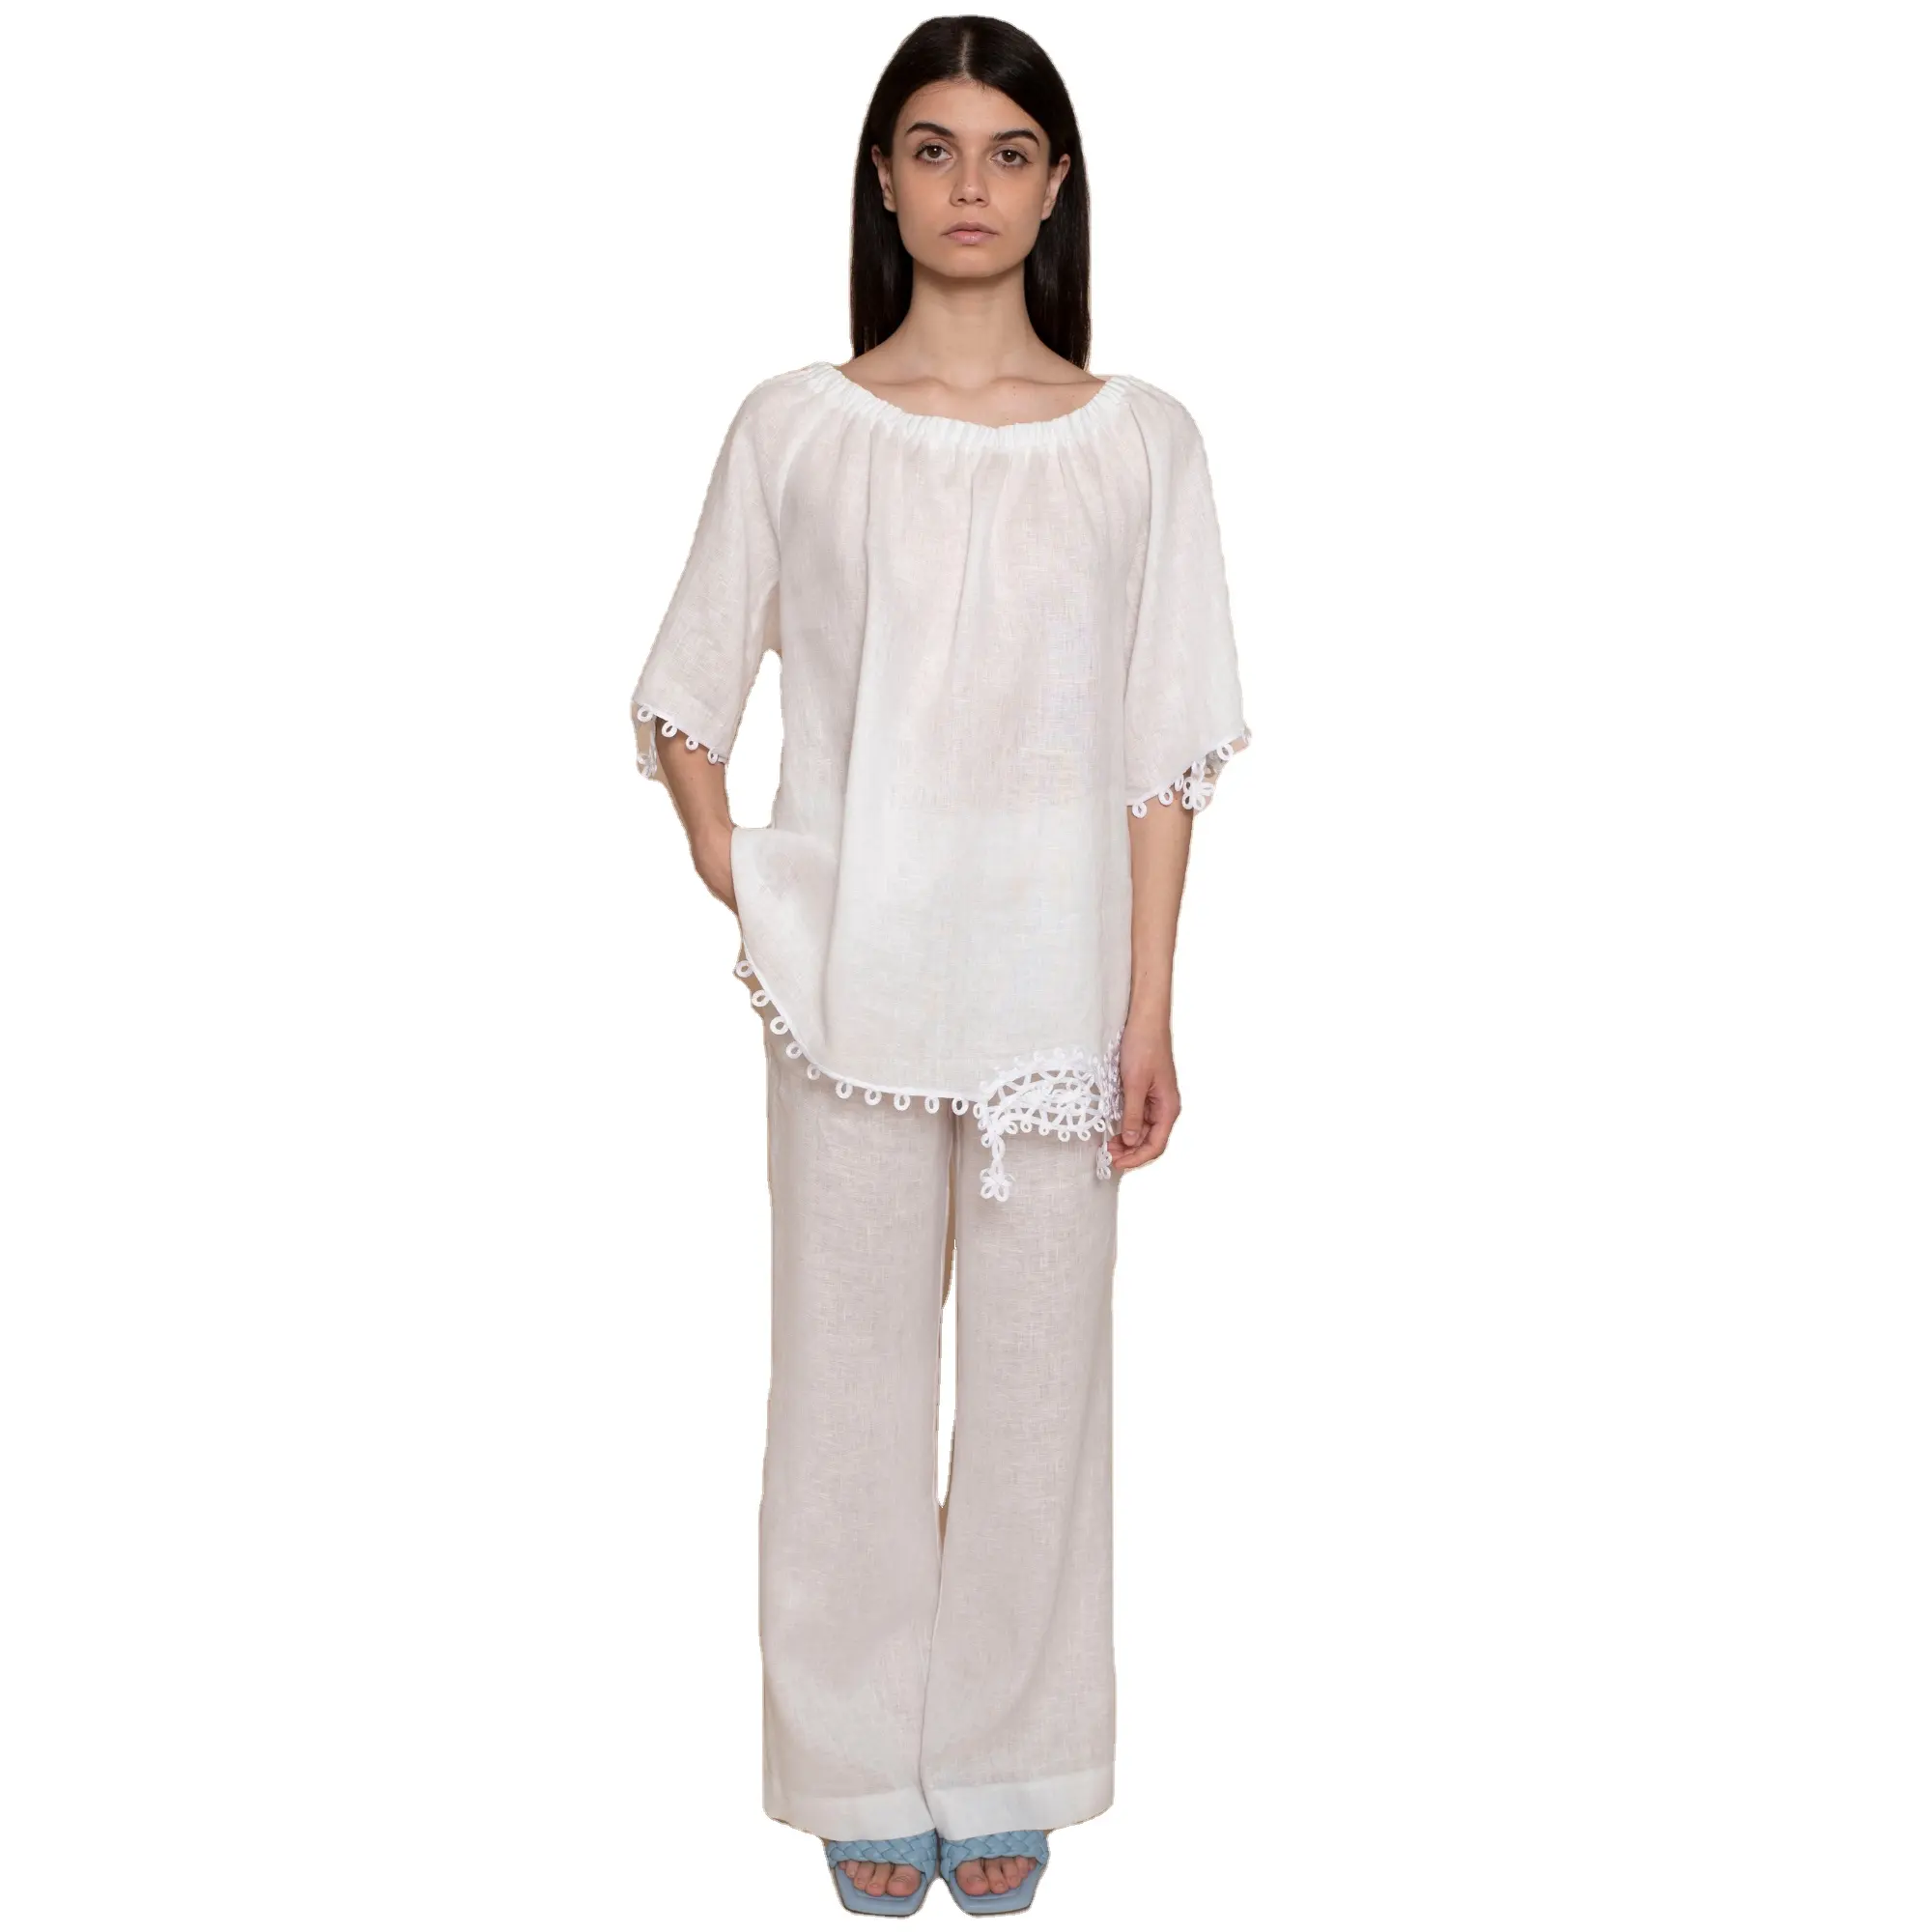 Best quality Italian linen tunic schiffer stretch neckline, embroidery on the sleeves and on the bottom. For the day